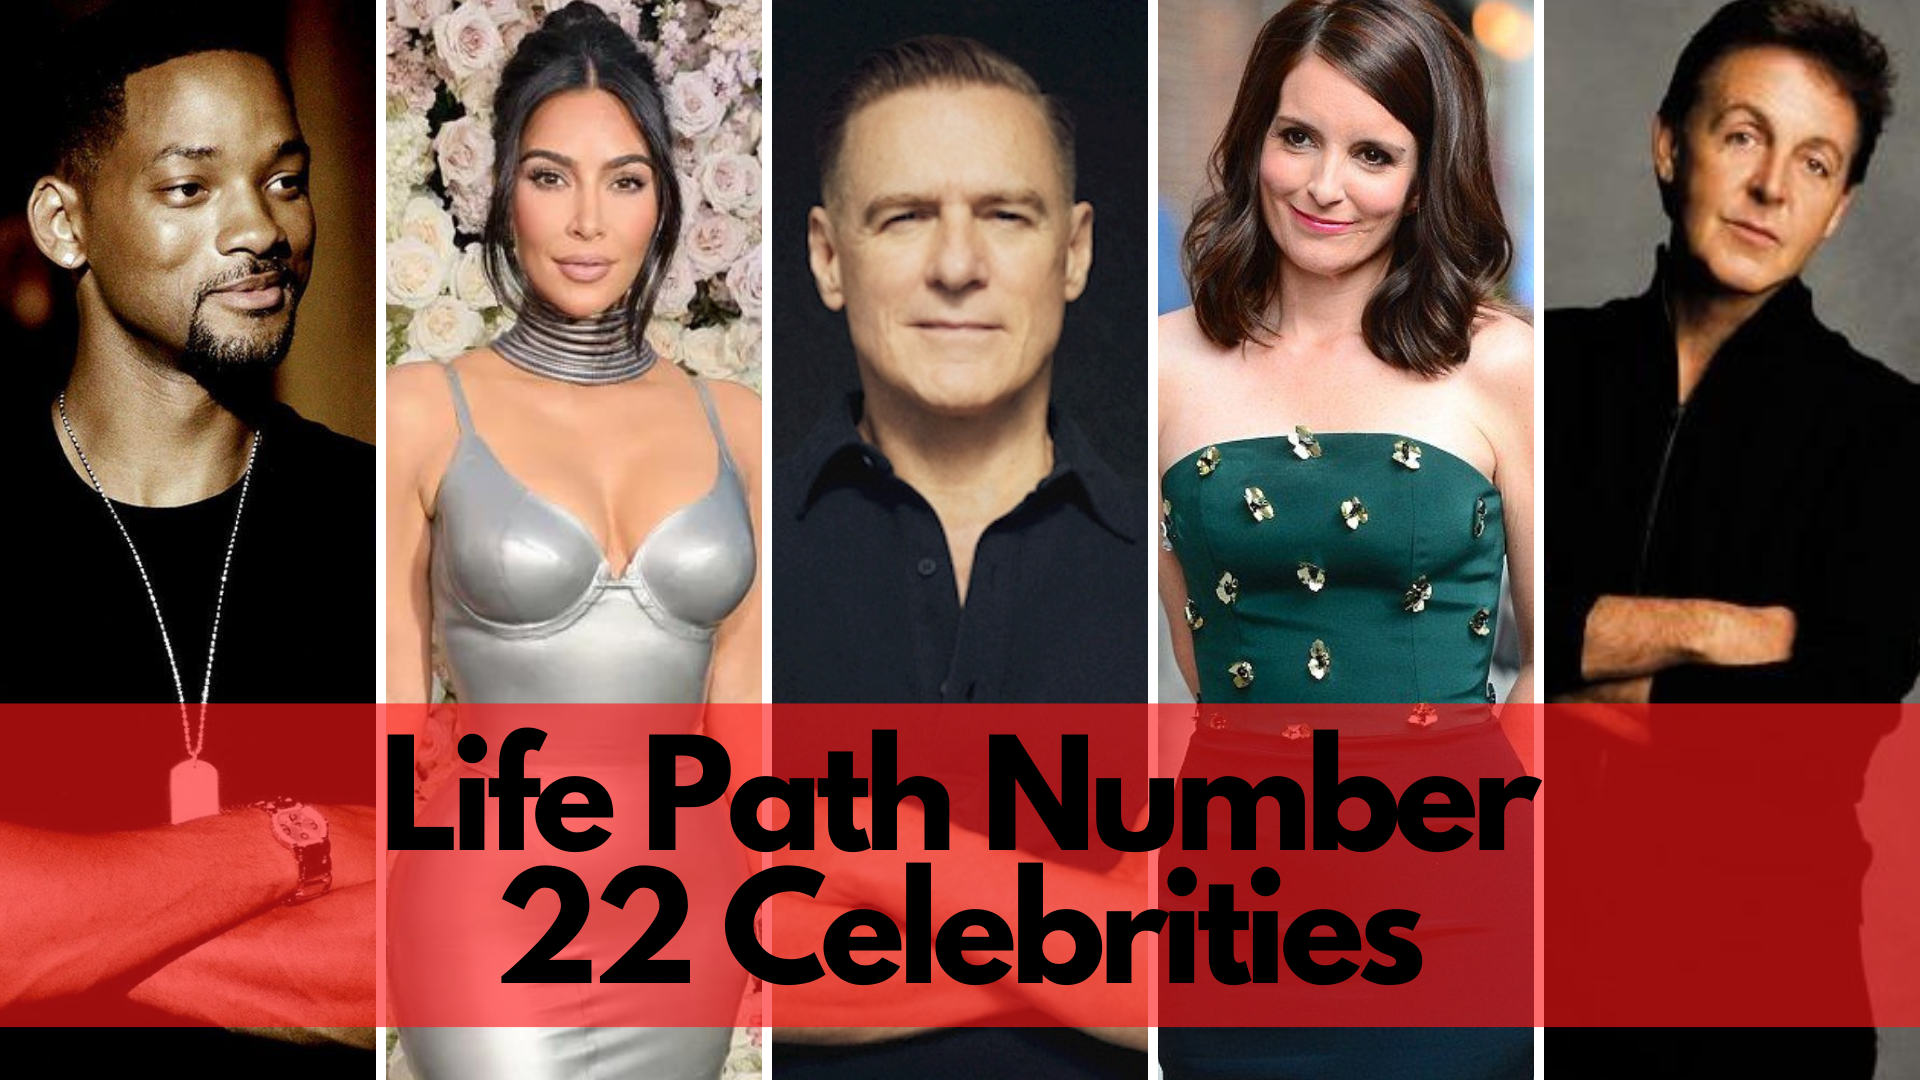 Life Path Number 22 Celebrities - The Most Powerful Paths In Numerology